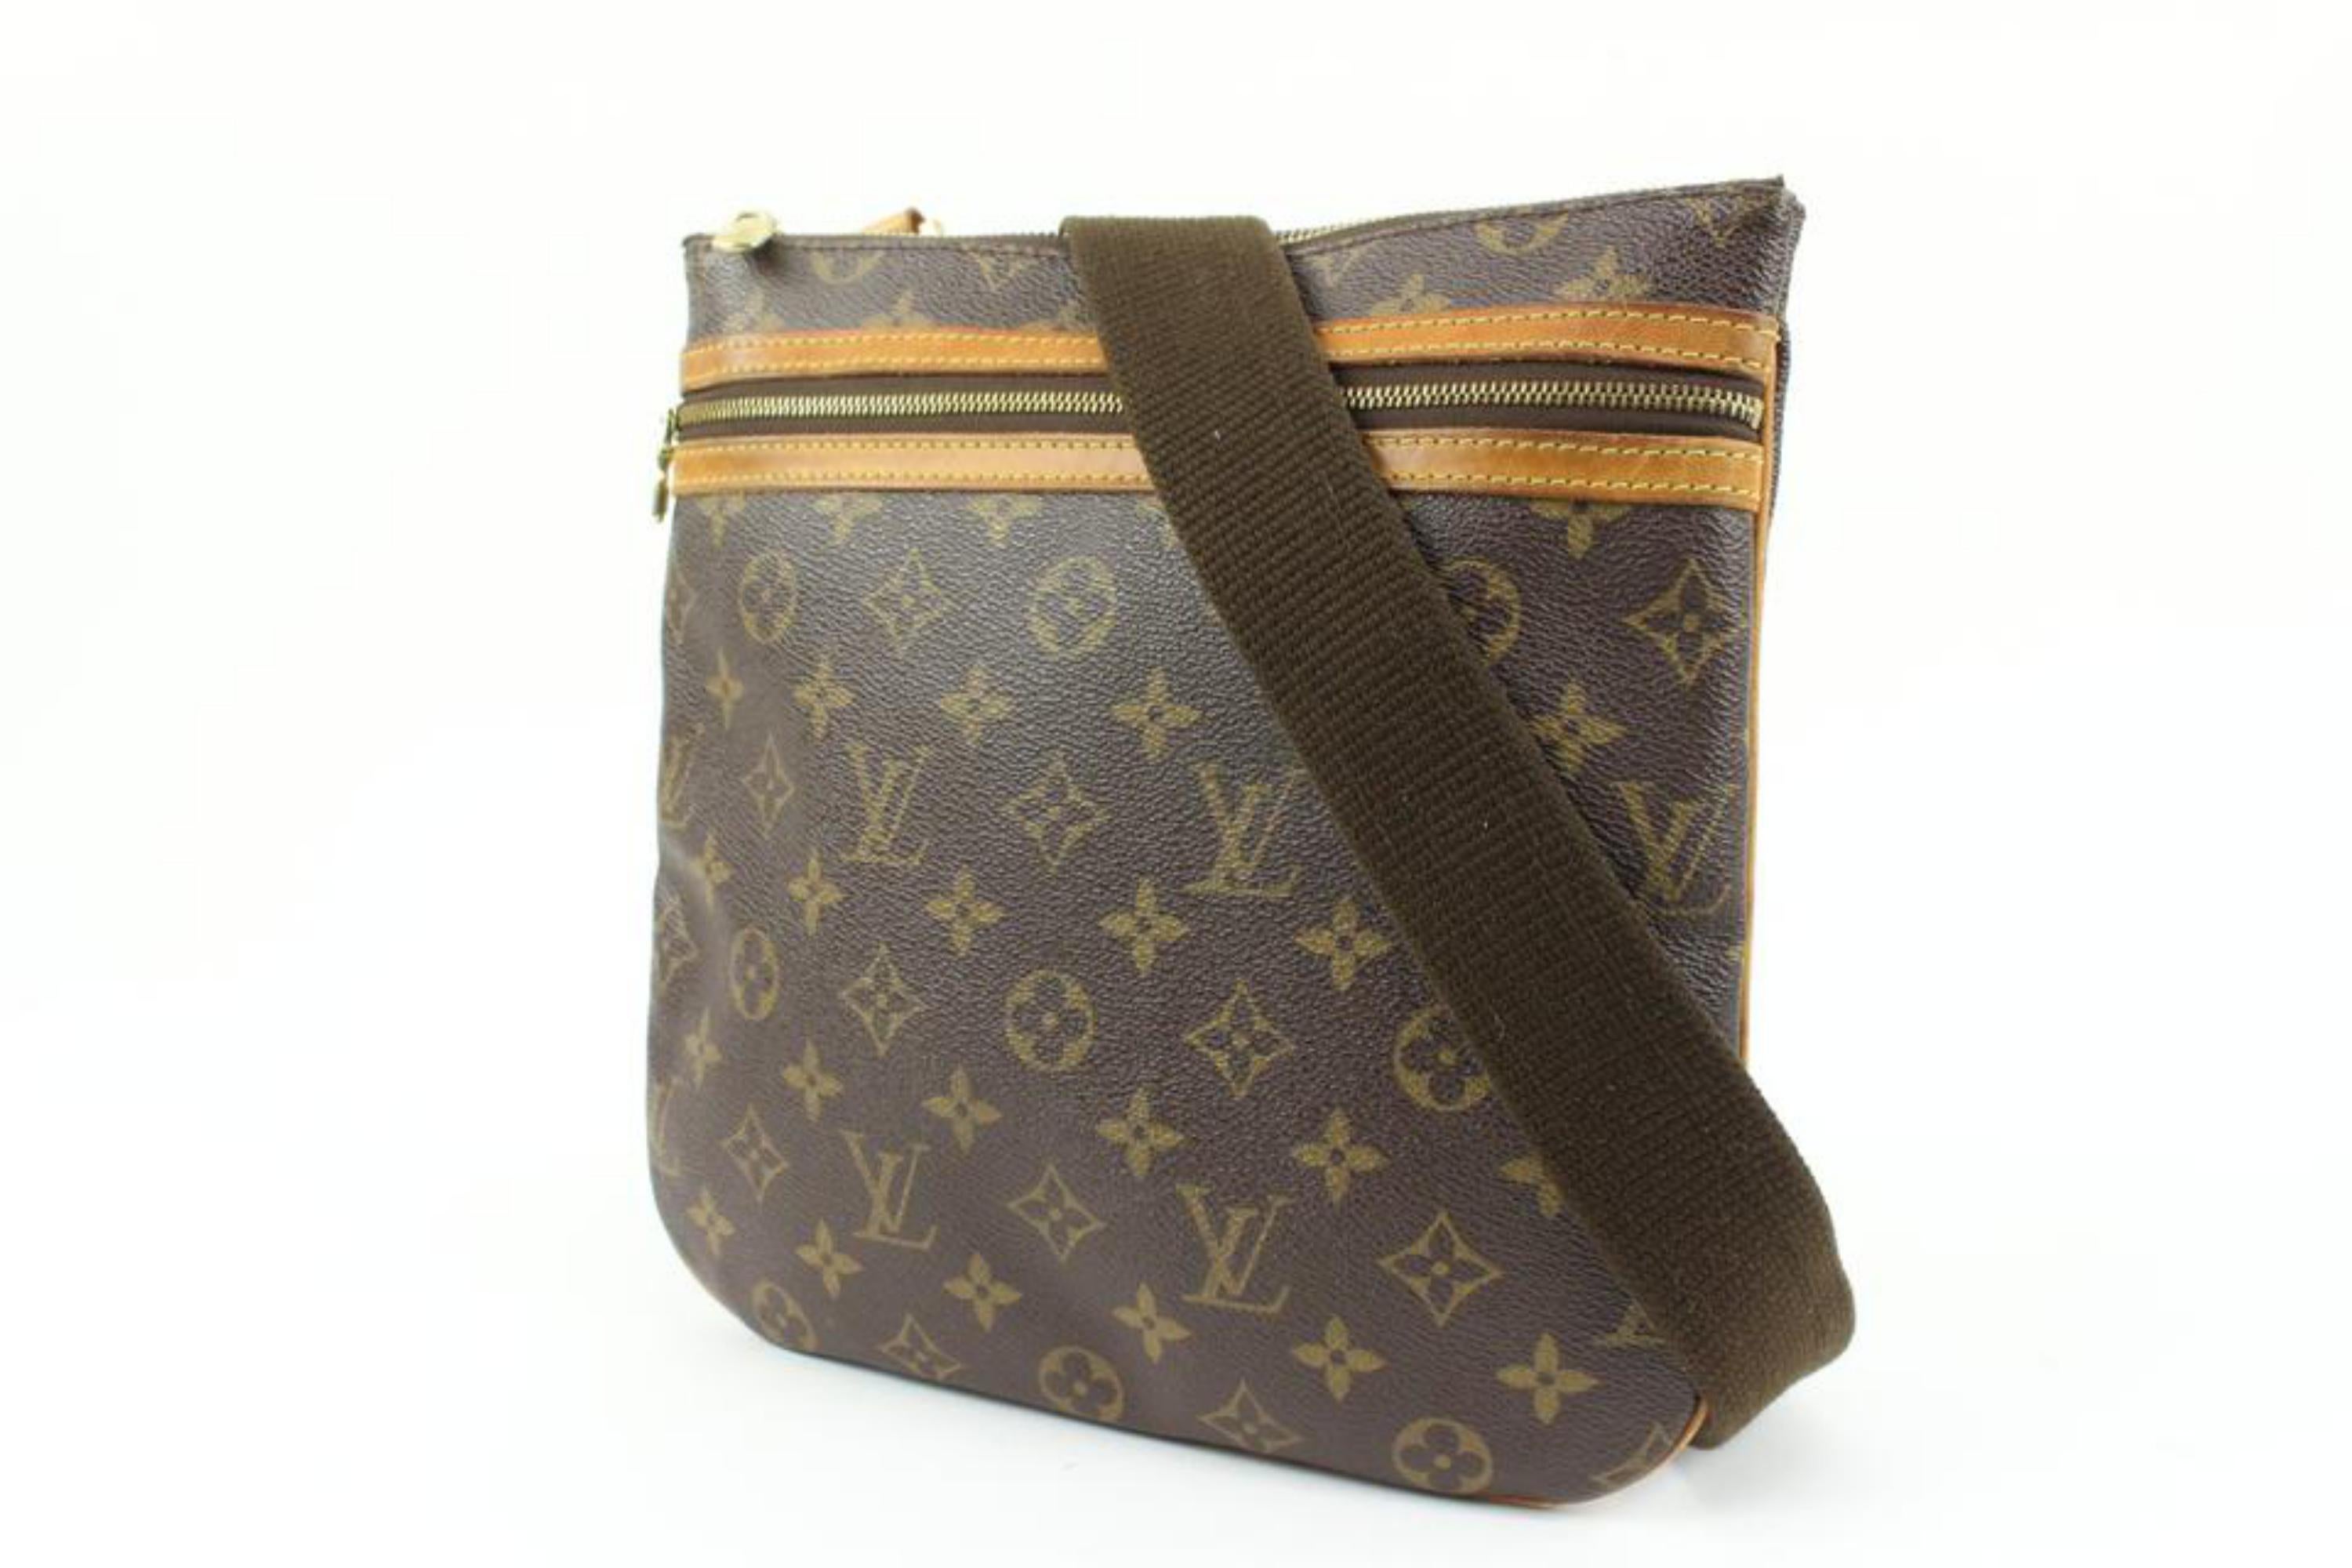 Louis Vuitton Discontinued Monogram Pochette Bosphore Crossbody Bag s28lv23
Date Code/Serial Number: MI0075
Made In: France
Measurements: Length:  10